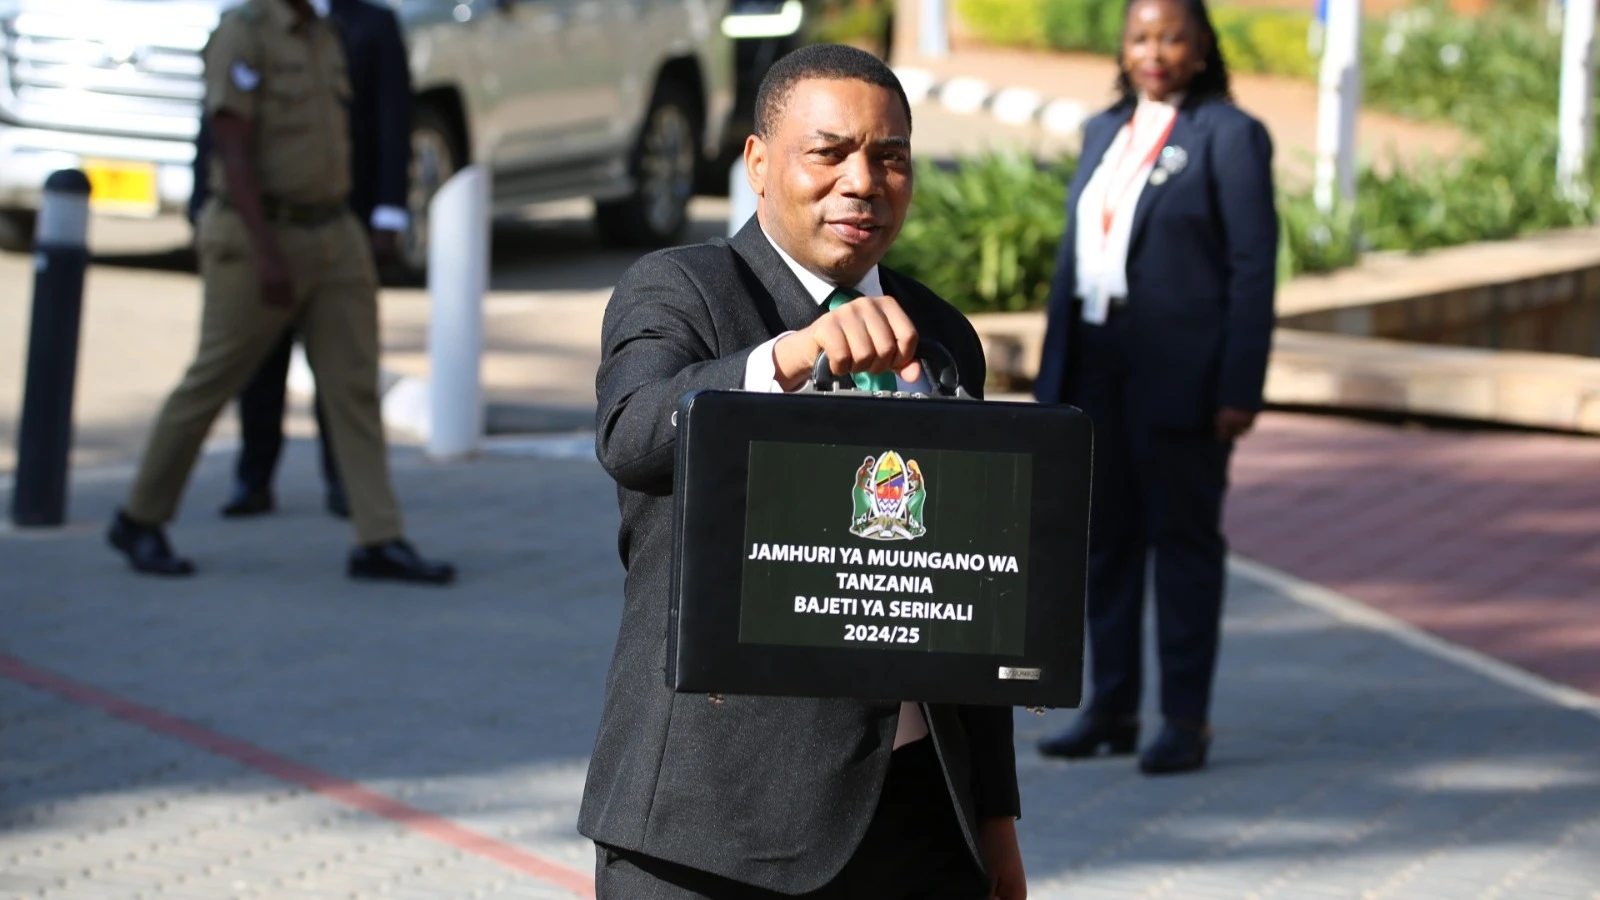 Finance Minister Dr Mwigulu Mchemba shows the
briefcase containing the government budget for 2024/25
while enter in the Parliament chamber for tabling in
Dodoma yesterday.